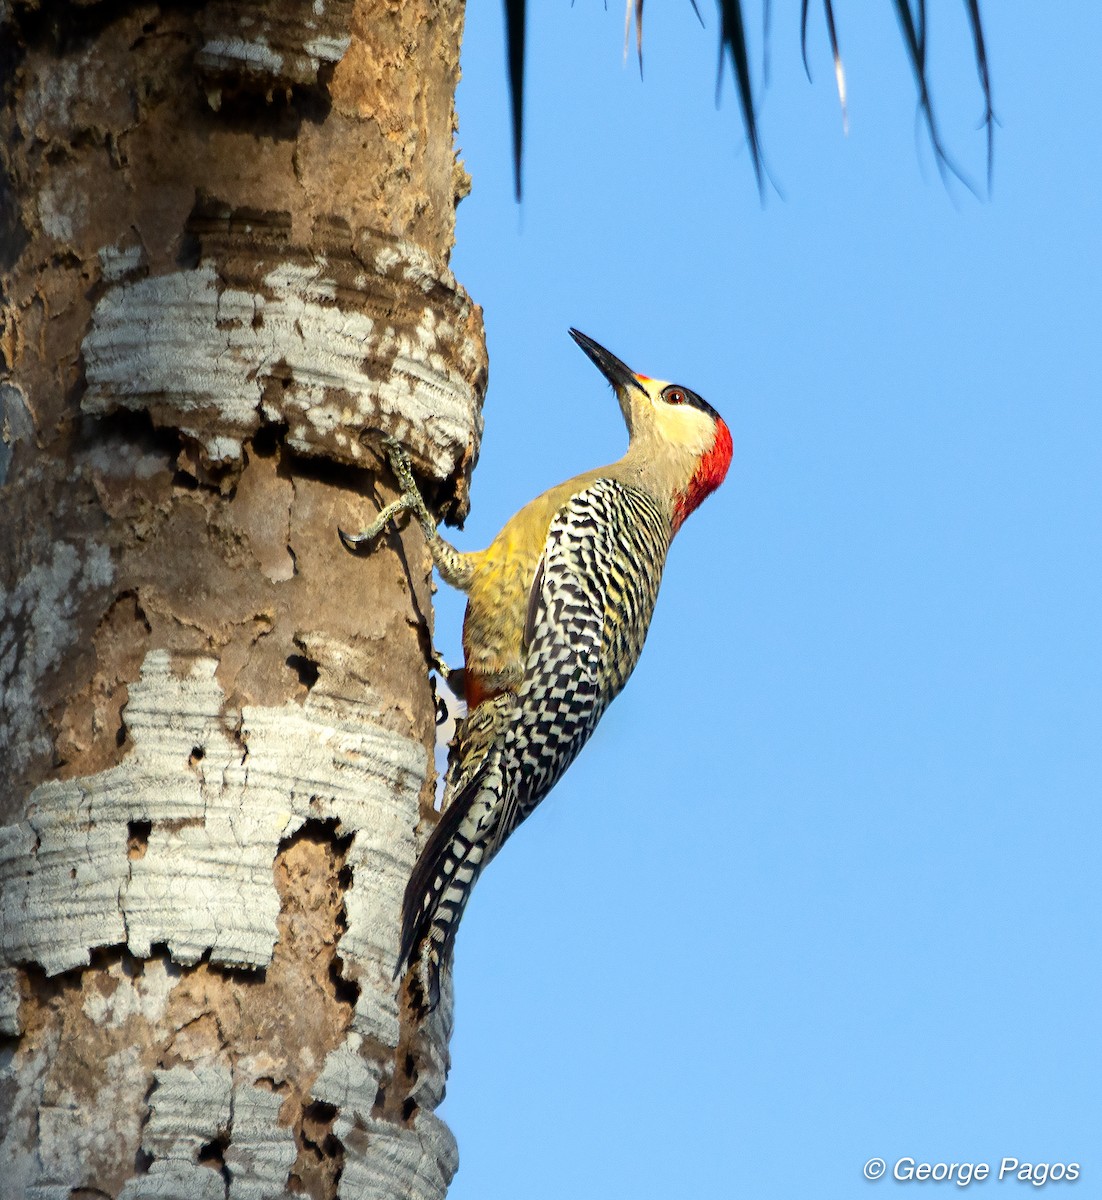 West Indian Woodpecker - George Pagos